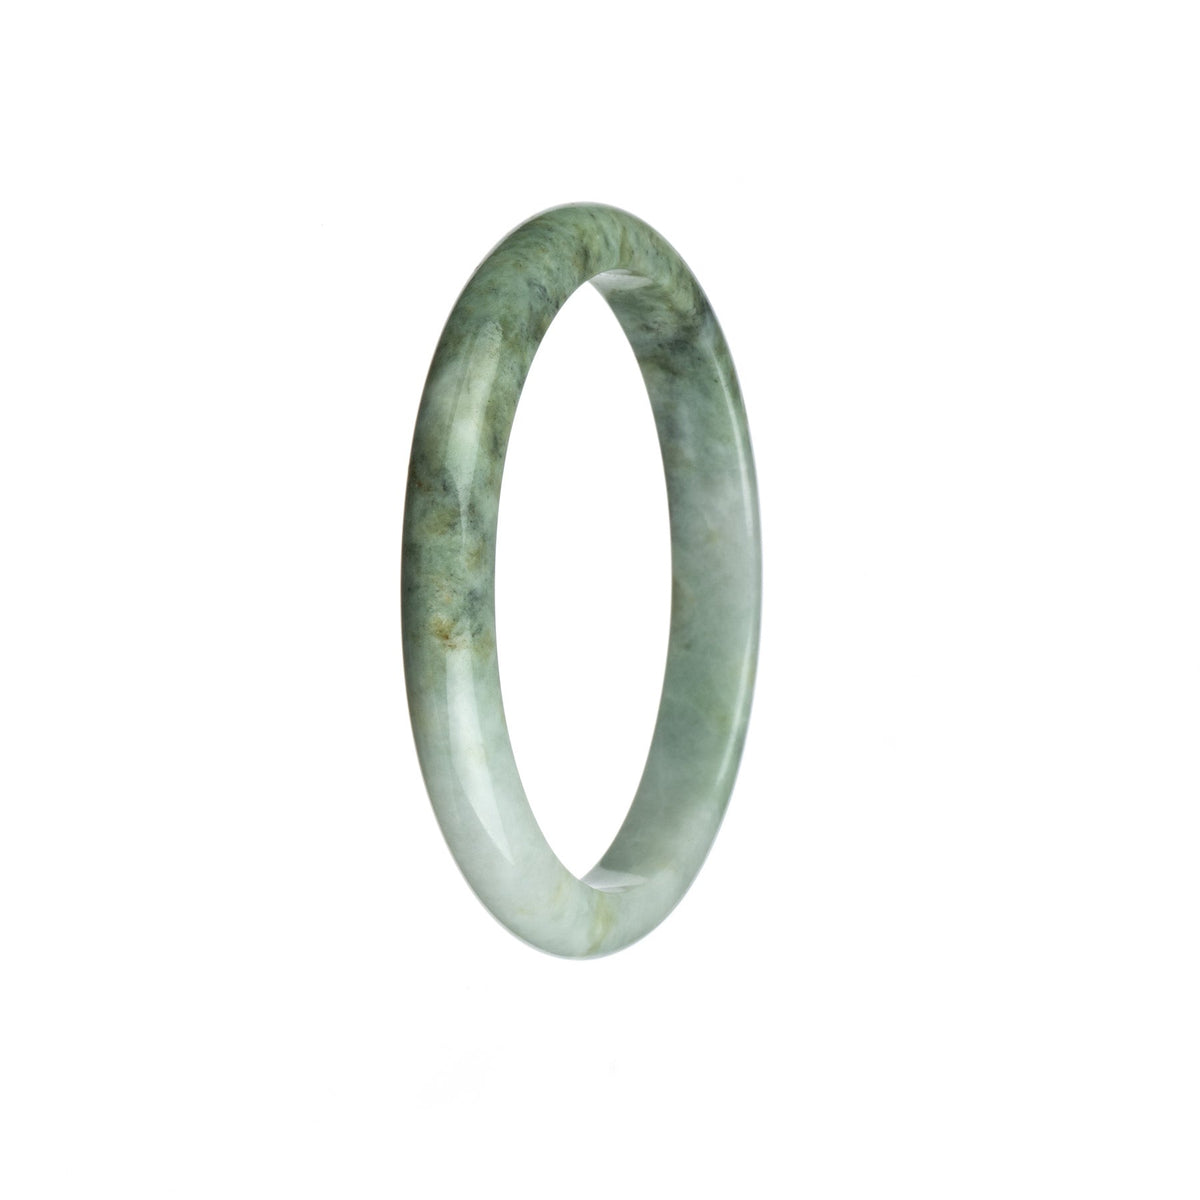 A beautiful semi-round Burma jade bangle in white and grey patterns, untreated and genuine. Measures 53mm in size.